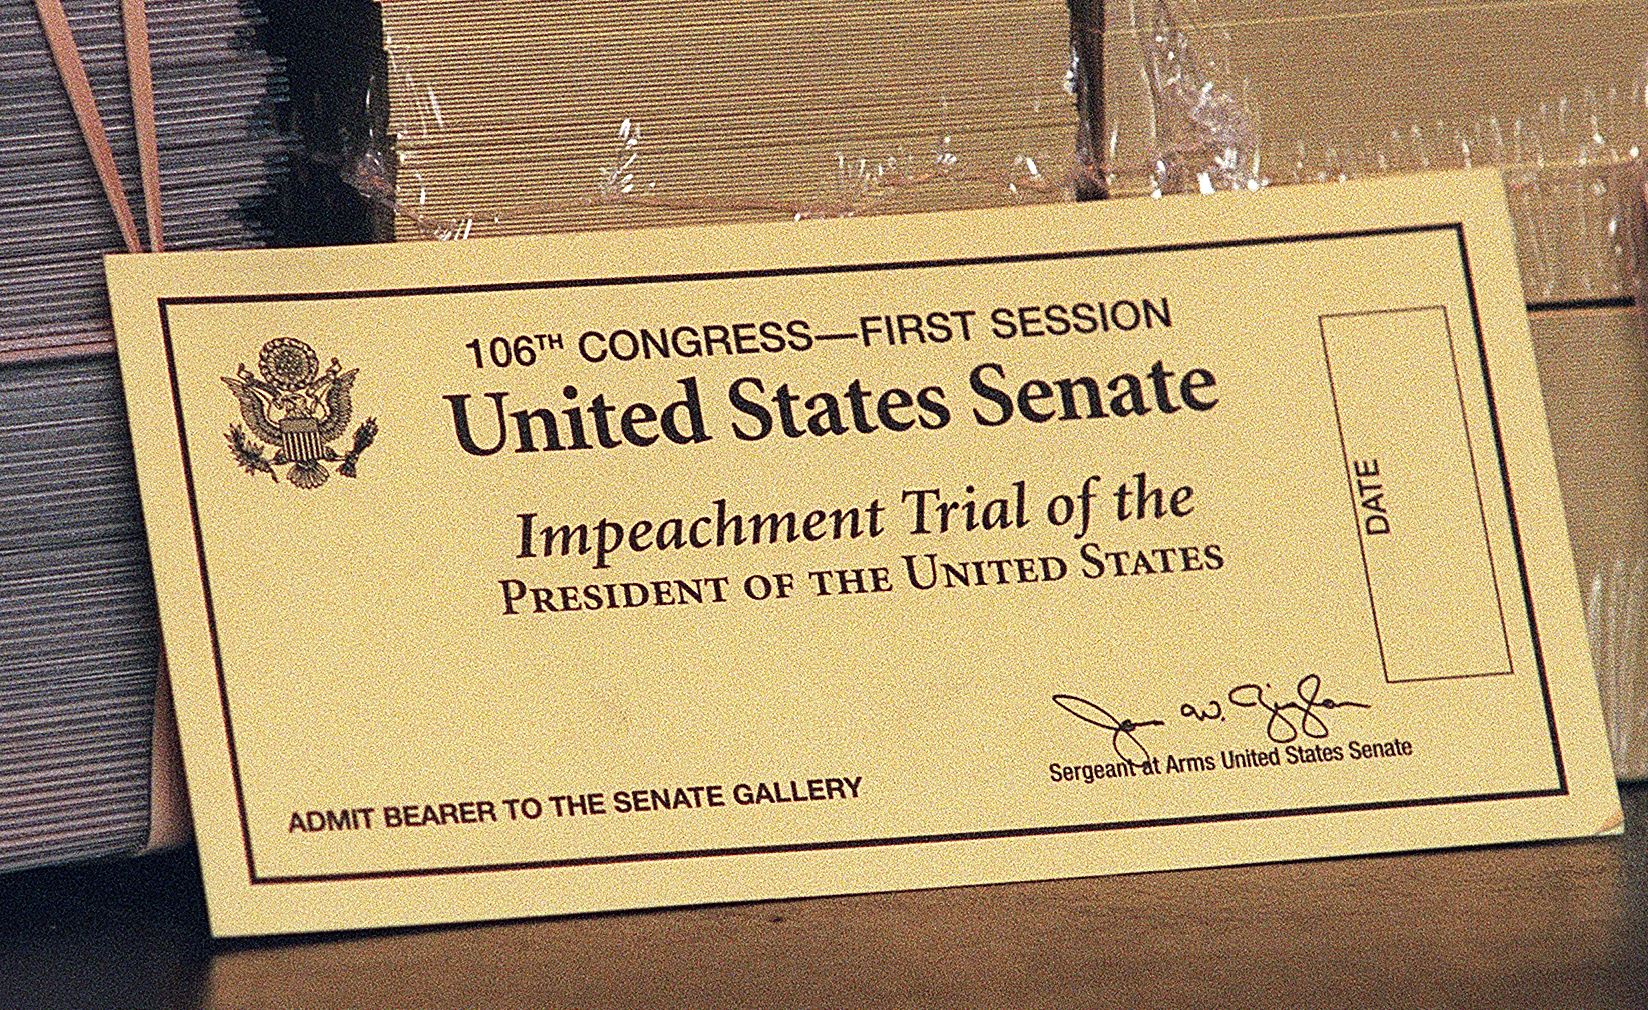 An official ticket to watch the impeachment trial of US President Bill Clinton